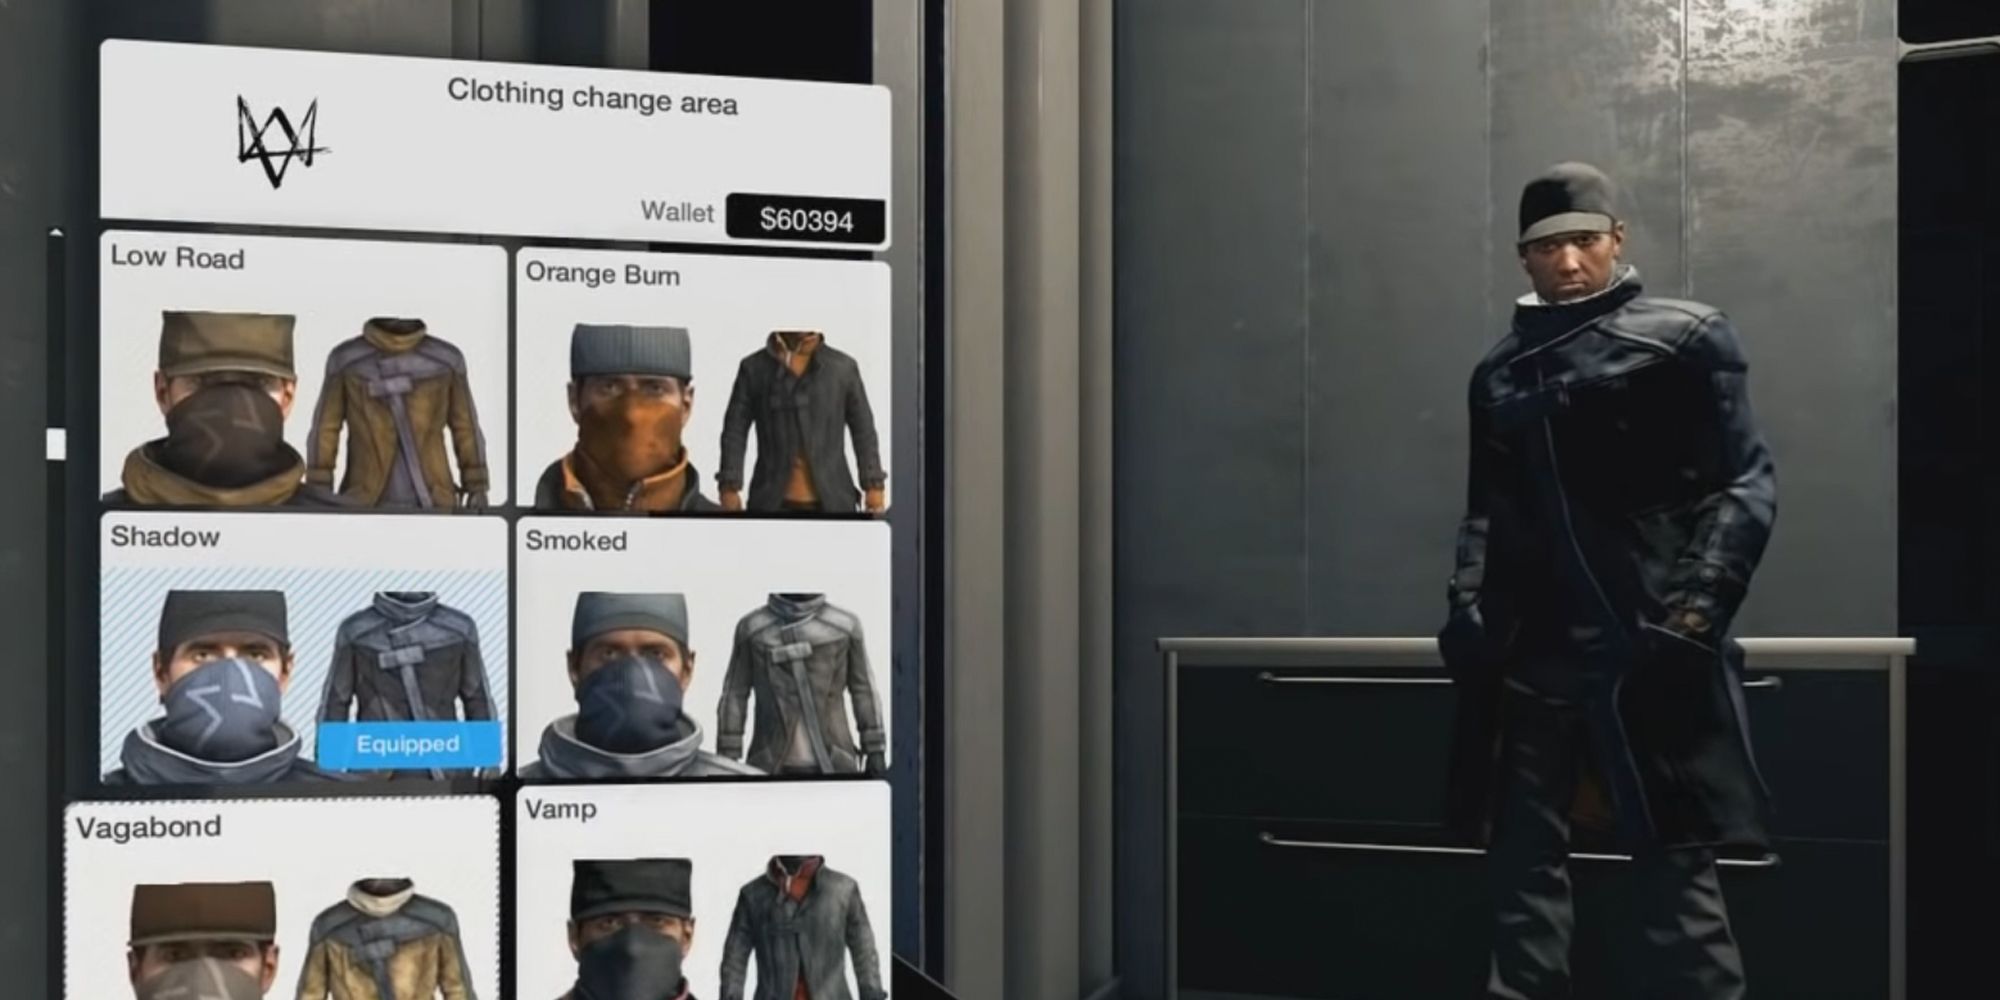 Watch Dogs outfit selection screen. Wearing the Shadow outfit.